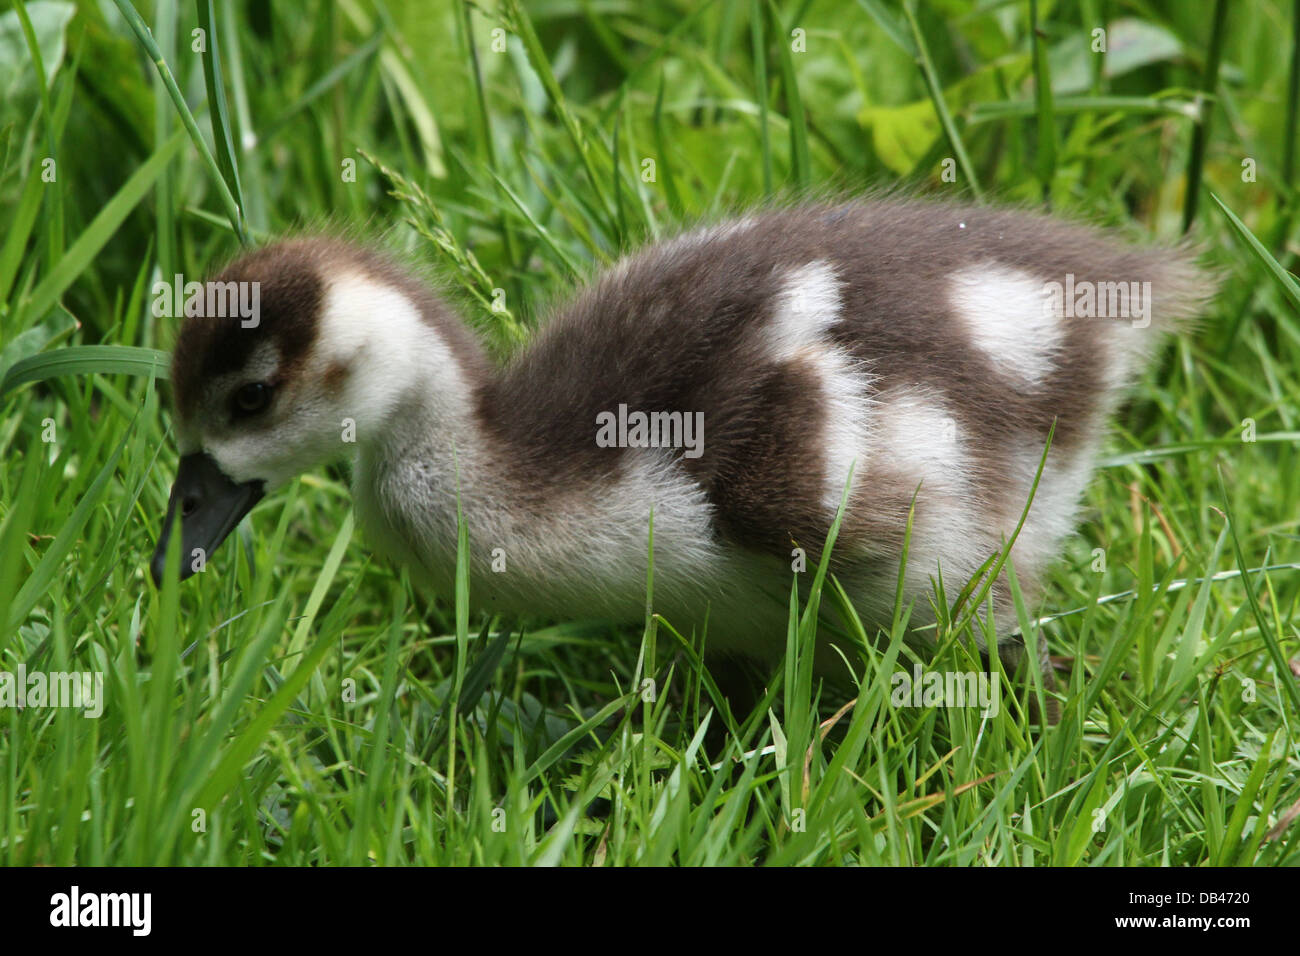 Series of 17 detailed close-ups of young Egyptian Geese( Alopochen aegyptiaca) foraging, playing, dozing and huddling together Stock Photo